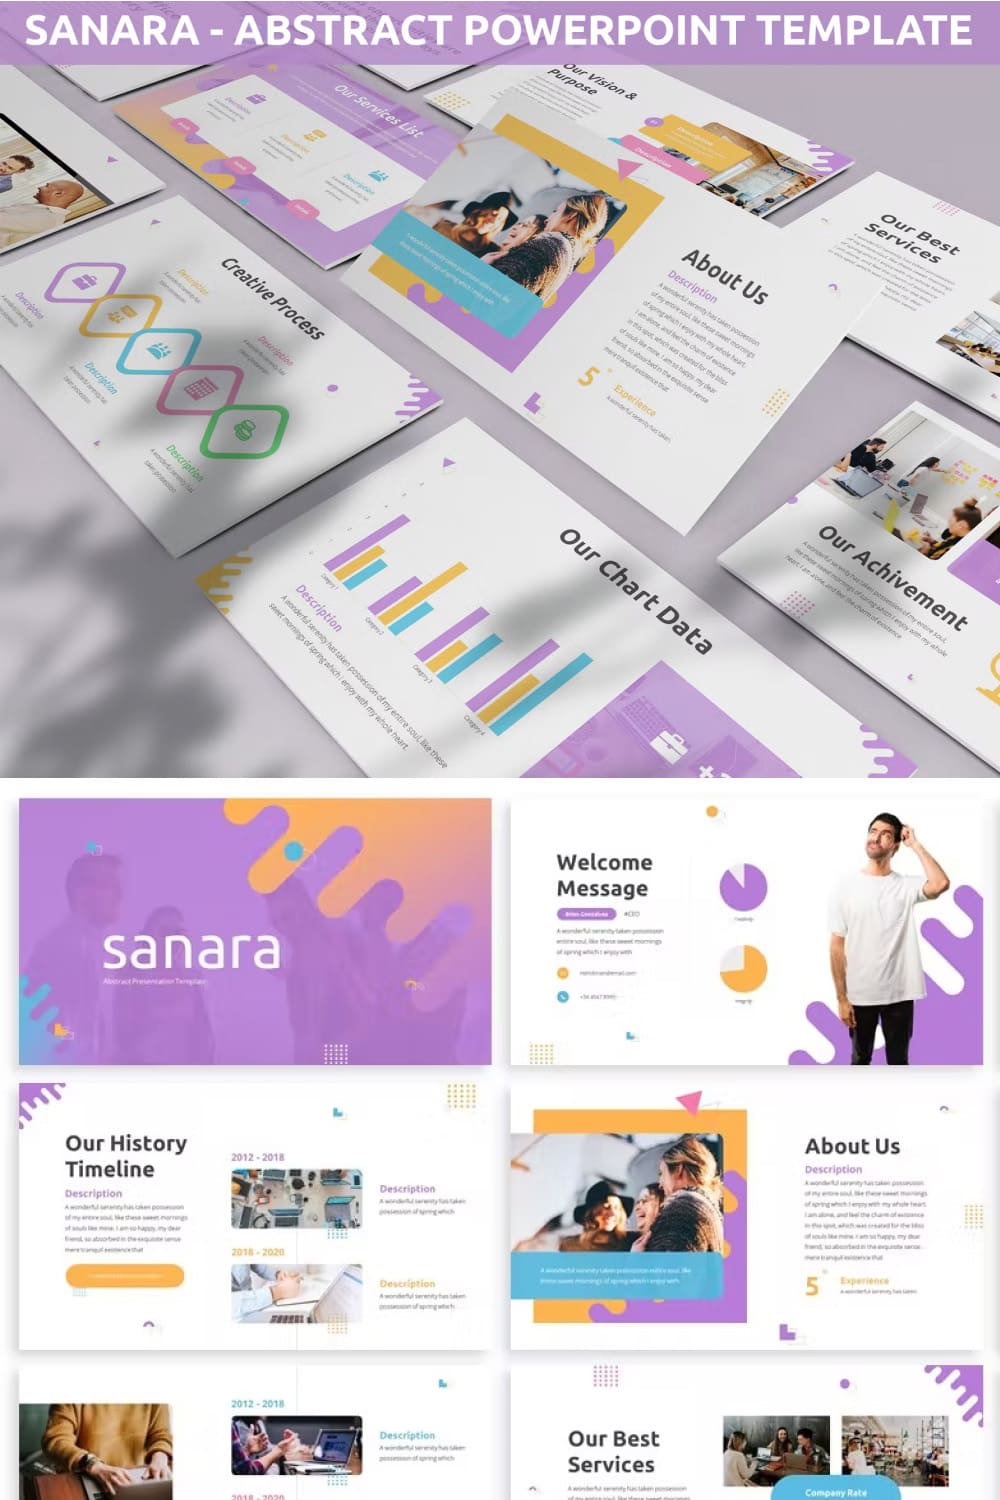 Sanara abstract powerpoint template - pinterest image preview.